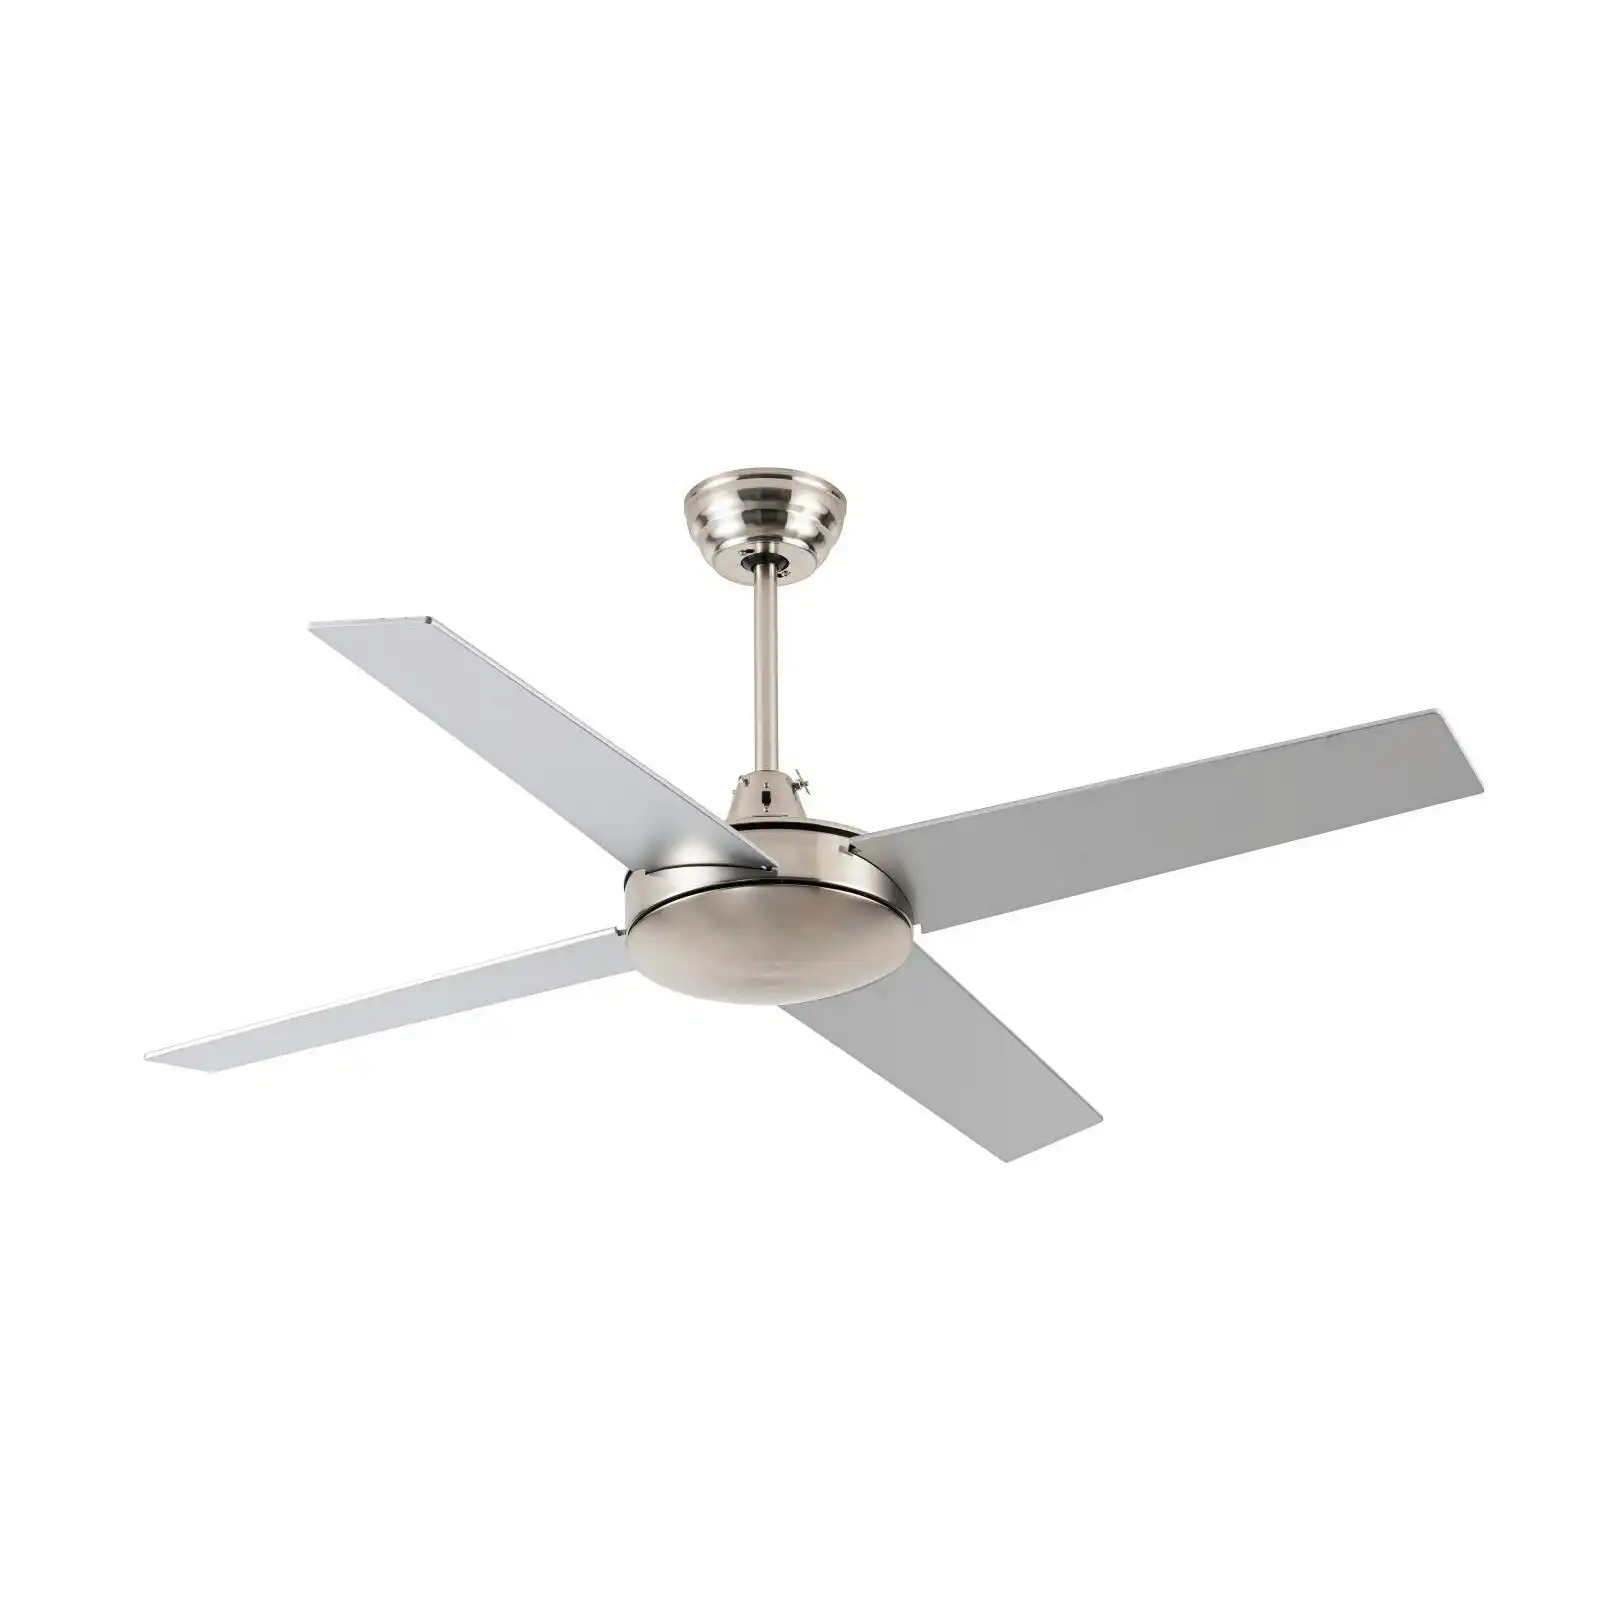 Viviendo 52 Inch 4 Blade Ceiling Fan with 3 Speed Remote Control - Silver